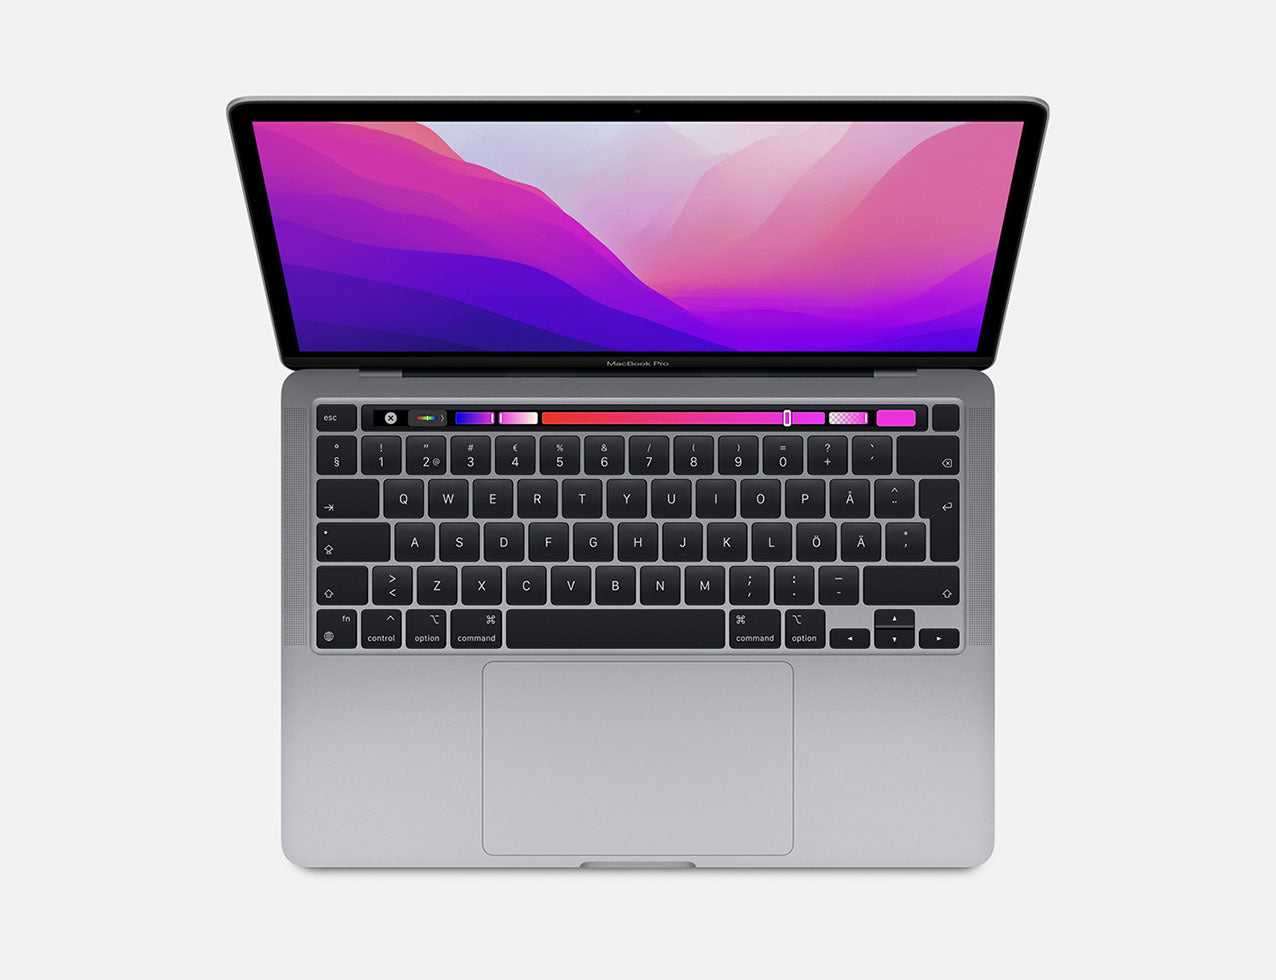 MacBook Pro 13inch Space Grey 512GB SSD 24GB Apple M2 chip with 8-core CPU 10-core GPU and 16-core Neural Engine 67W USB-C